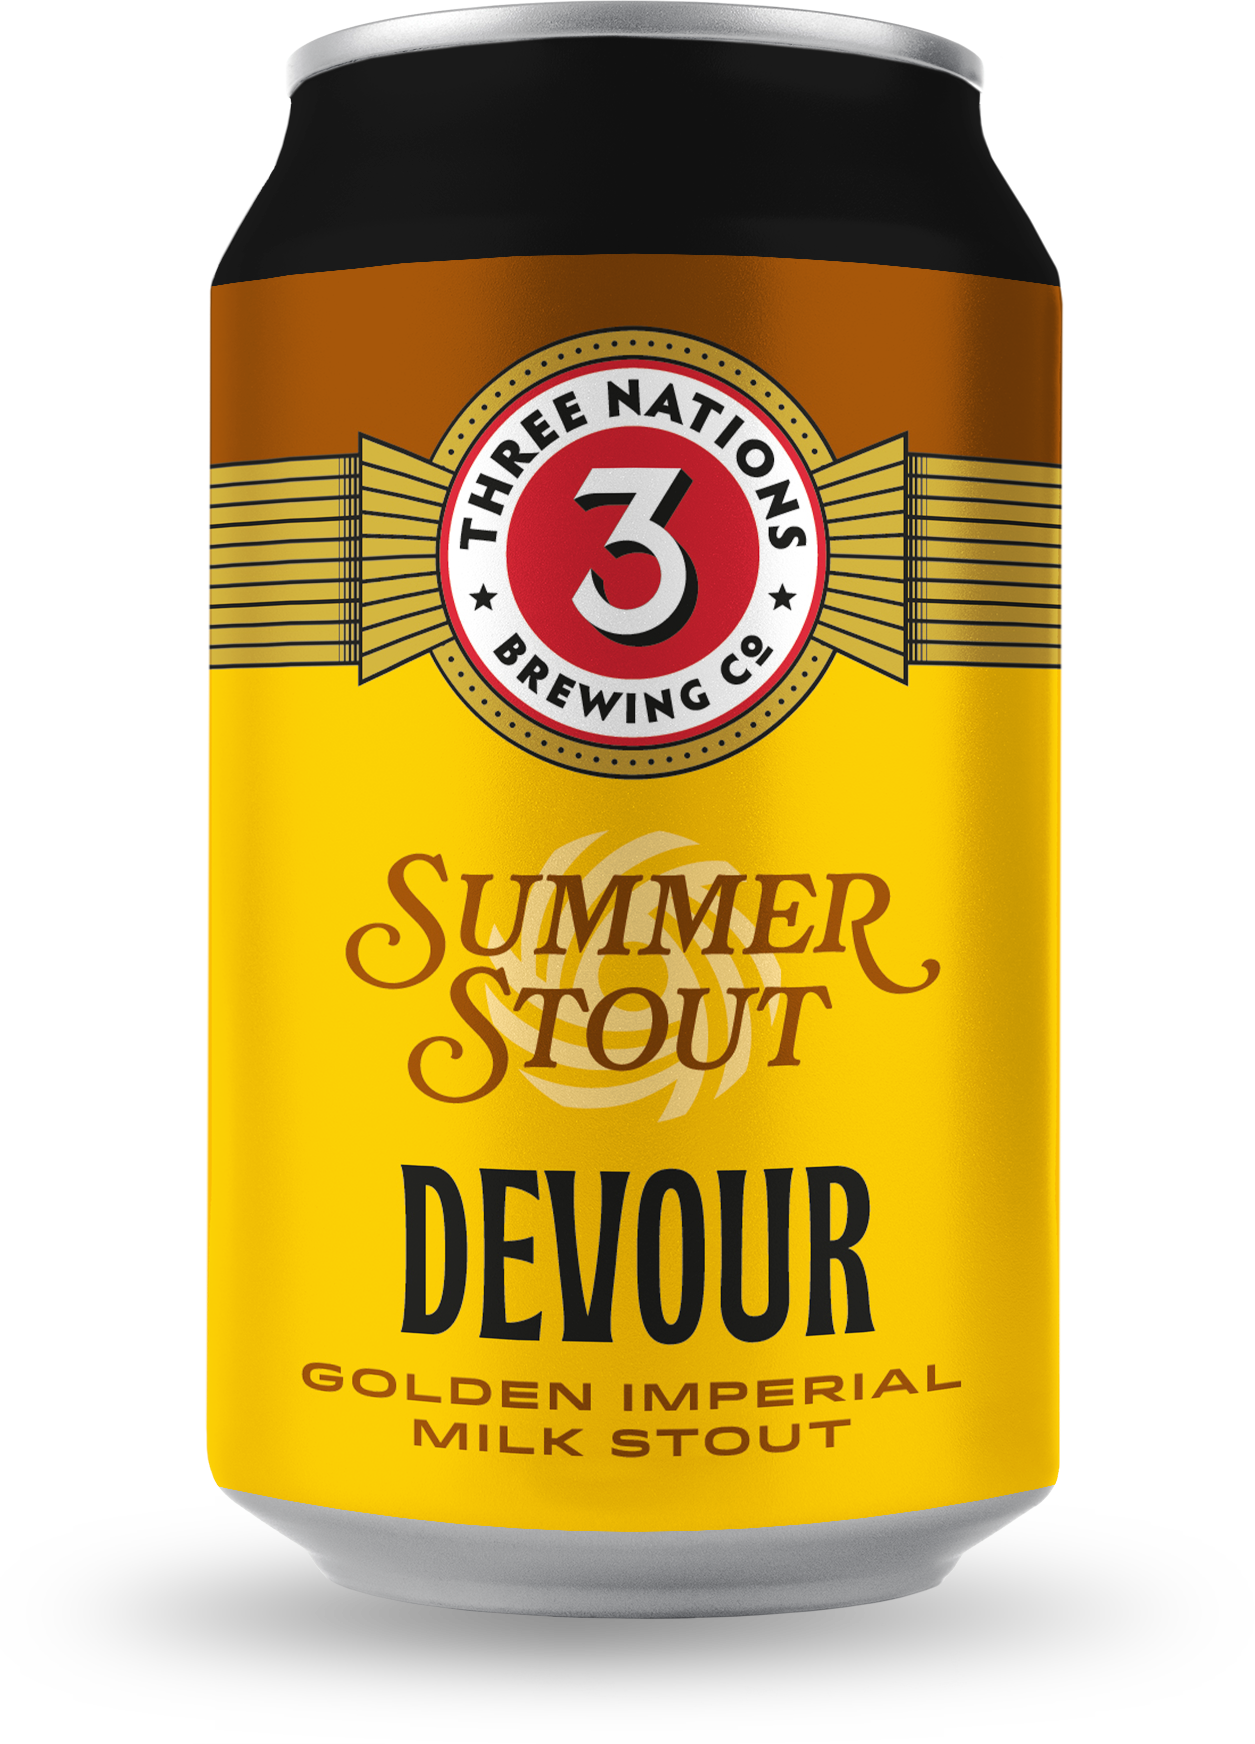 3 Nations brewing's summer stout can design